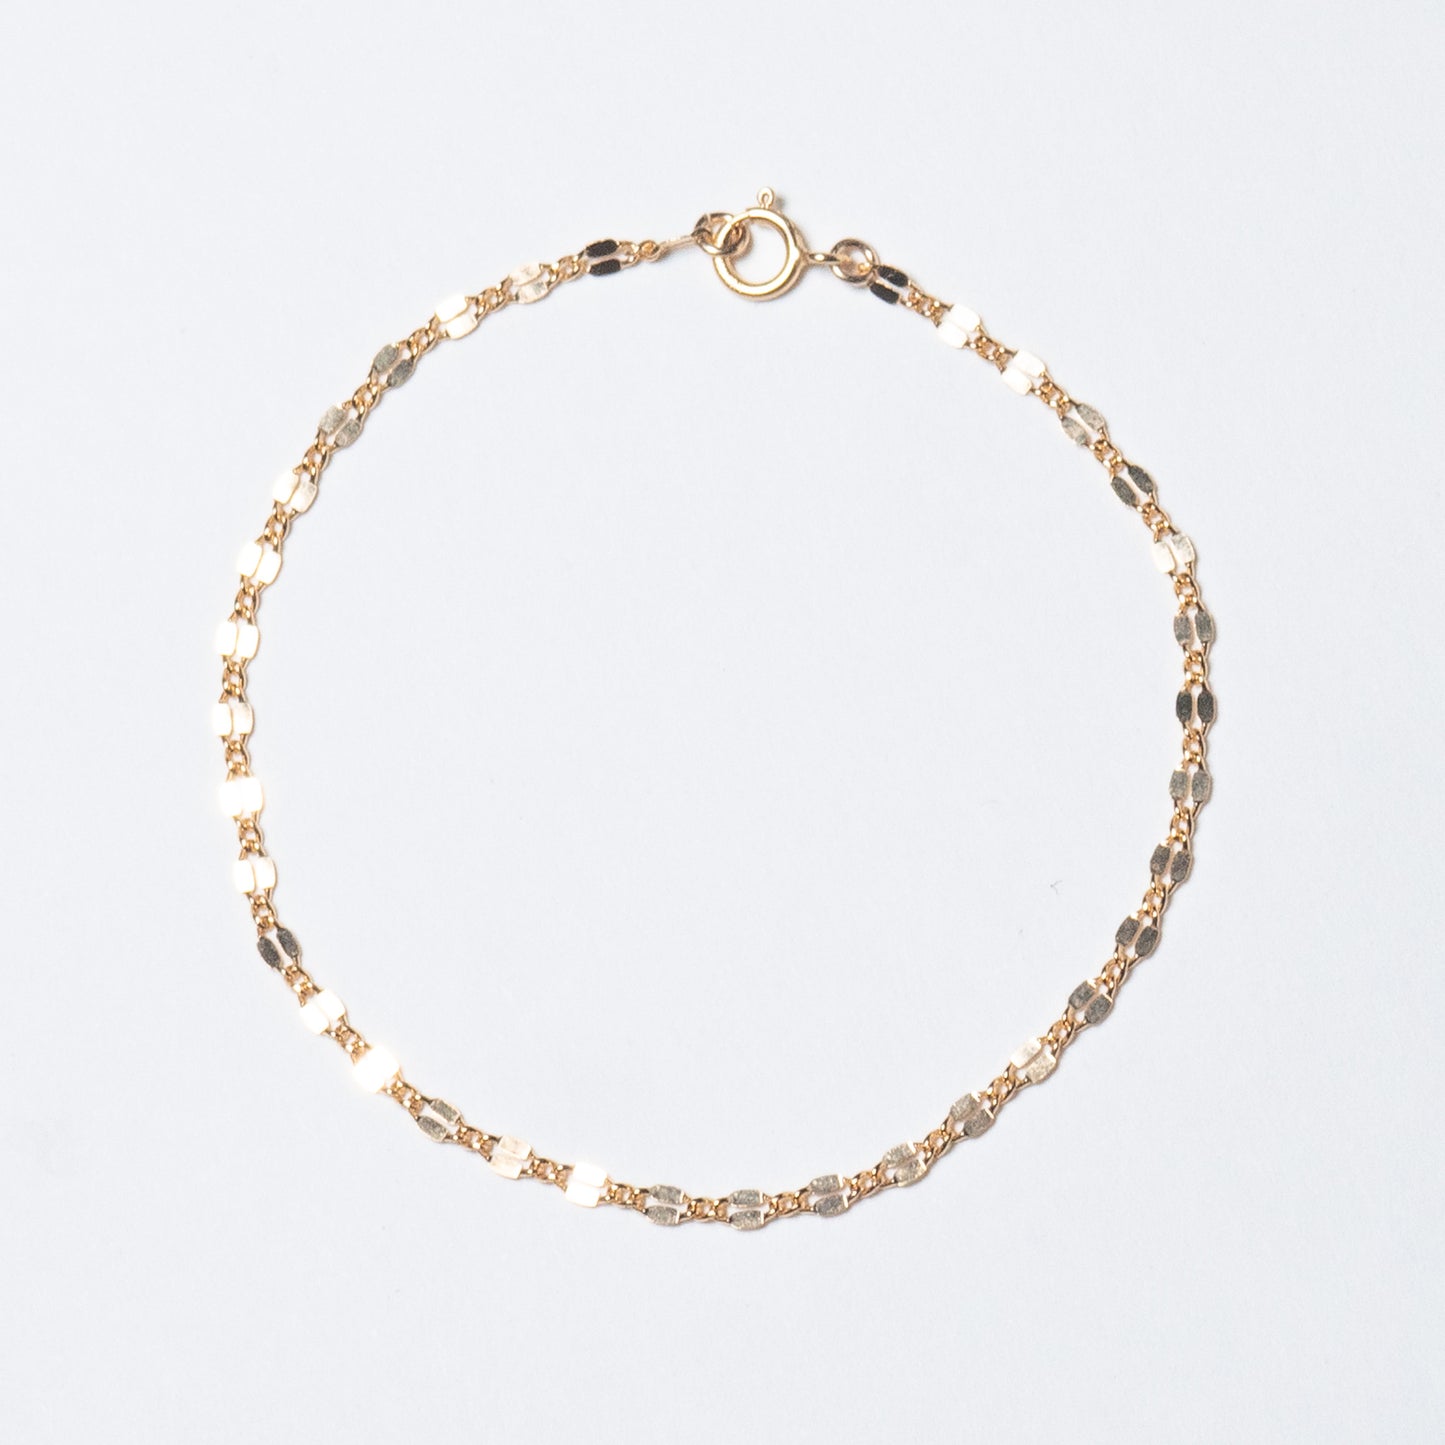 Dainty Gold Filled Dapped Chain Bracelet.